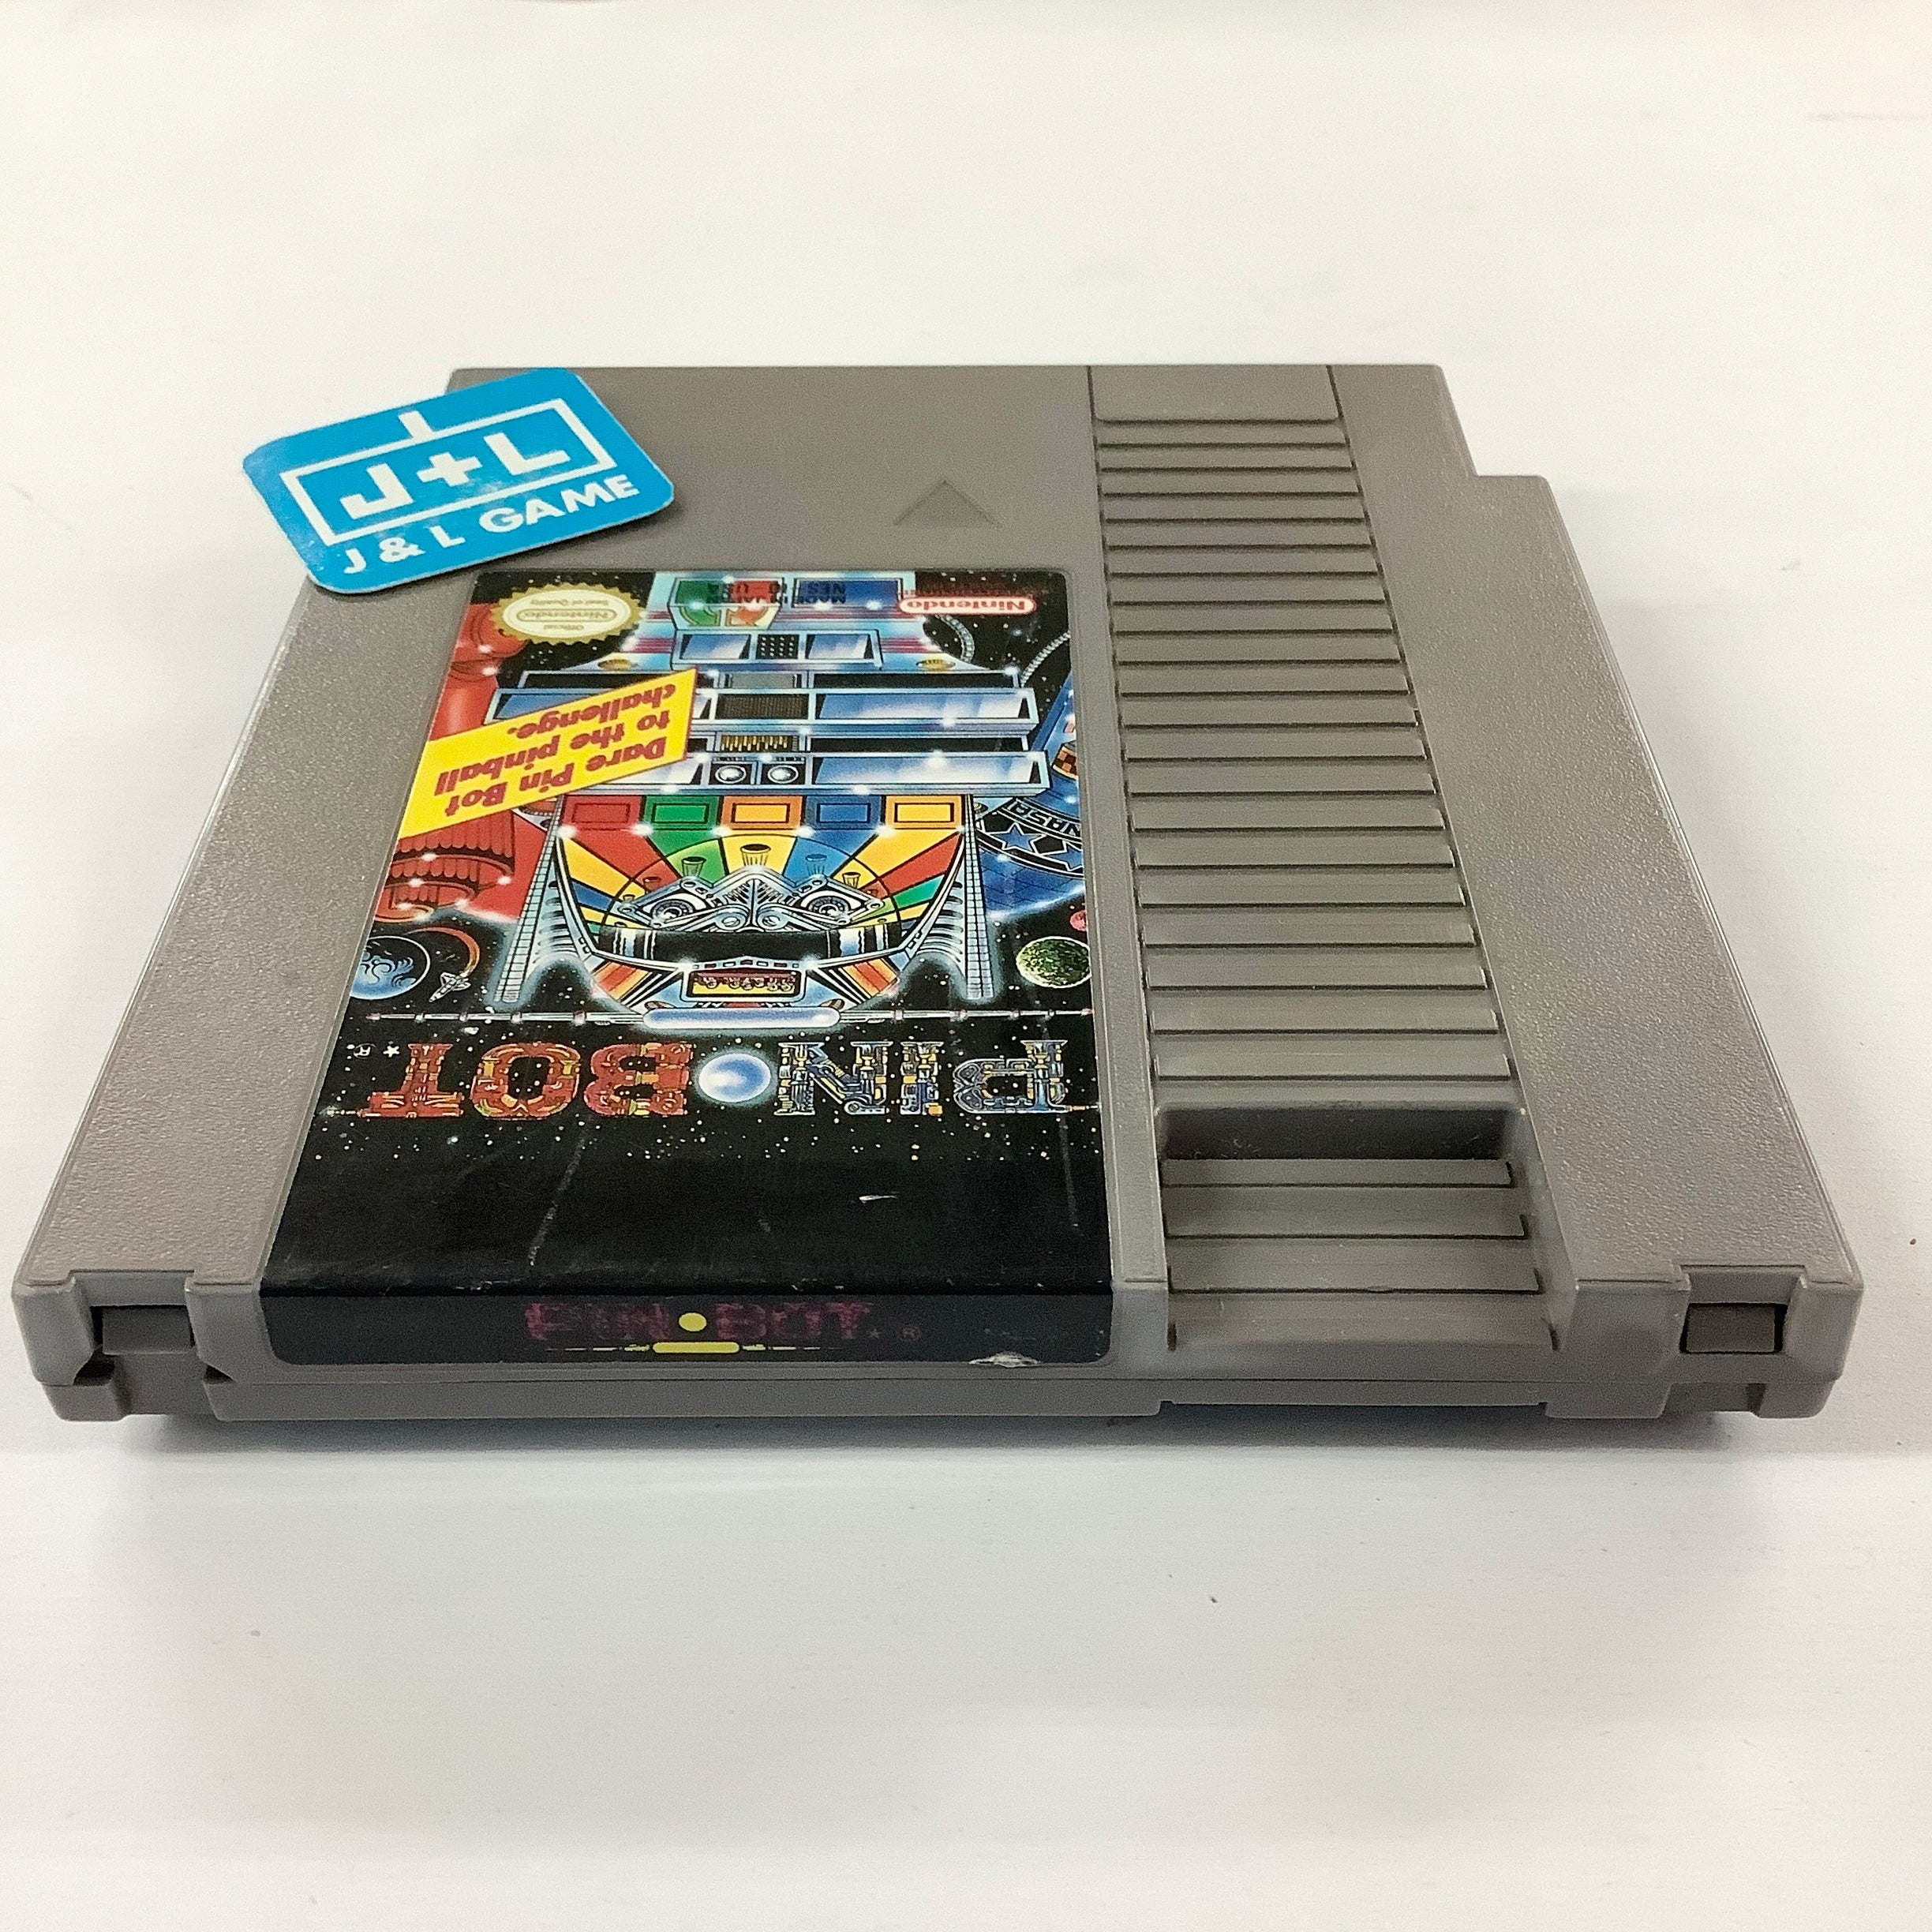 Pinbot - (NES) Nintendo Entertainment System [Pre-Owned] Video Games Nintendo   